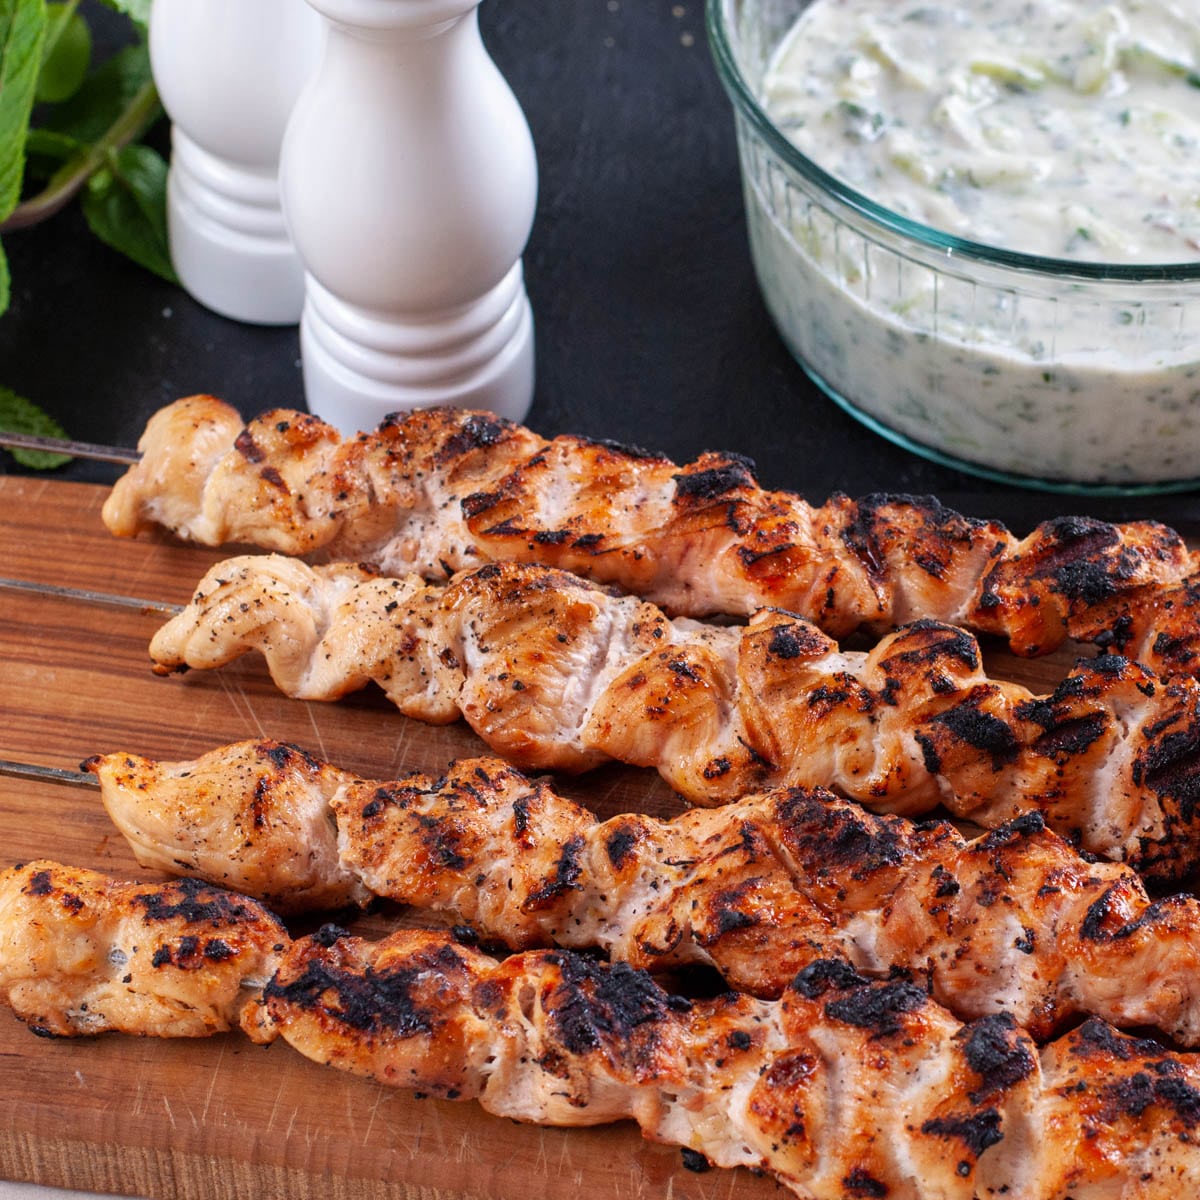 bbq chicken breast on skewers with the yogurt sauce in the back